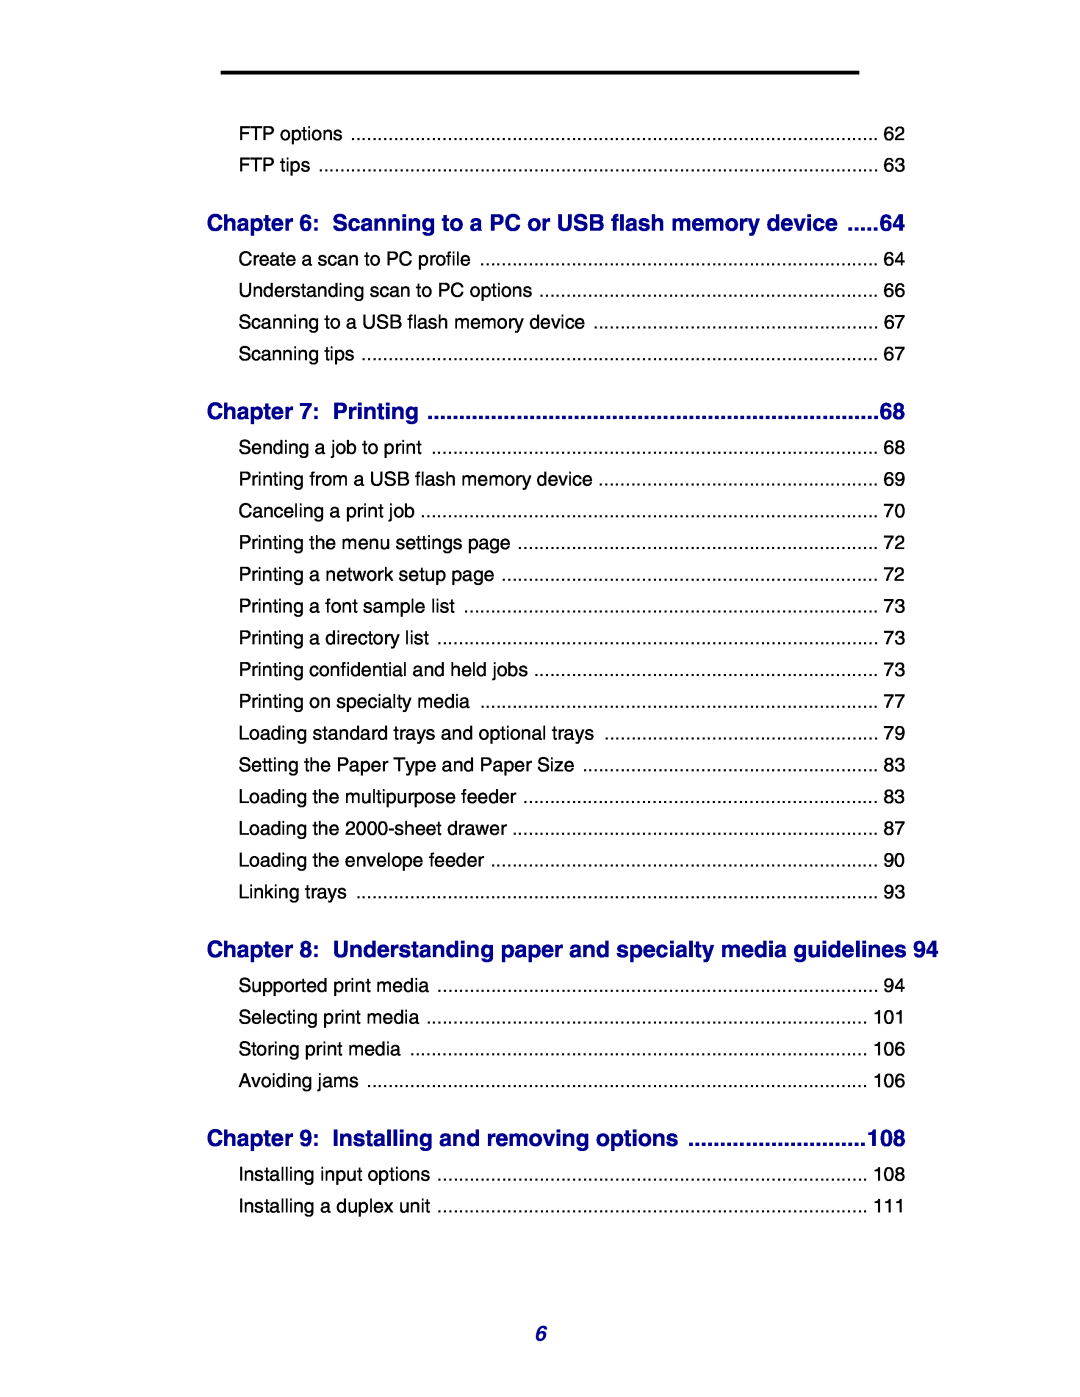 Lexmark X642e Scanning to a PC or USB flash memory device, Understanding paper and specialty media guidelines, Printing 